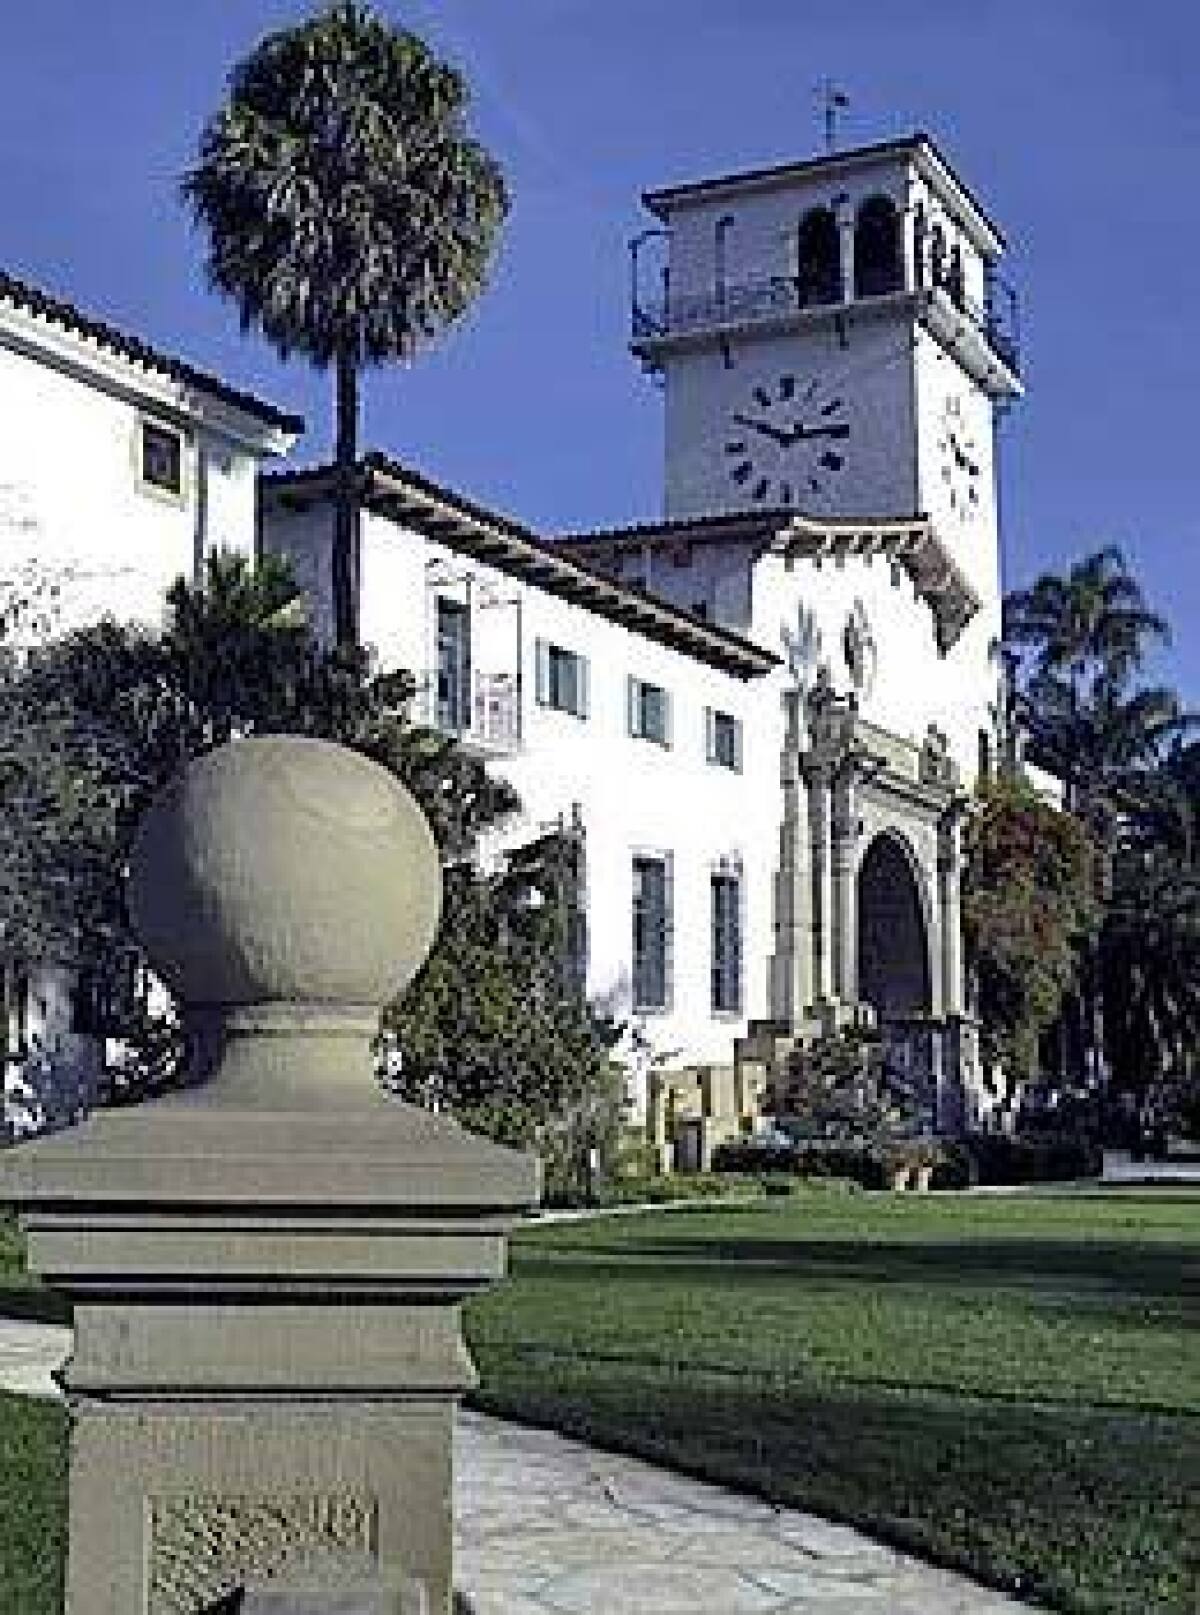 The Santa Barbara County Courthouse is an offbeat mix of Moorish, Italian and Spanish Colonial styles.